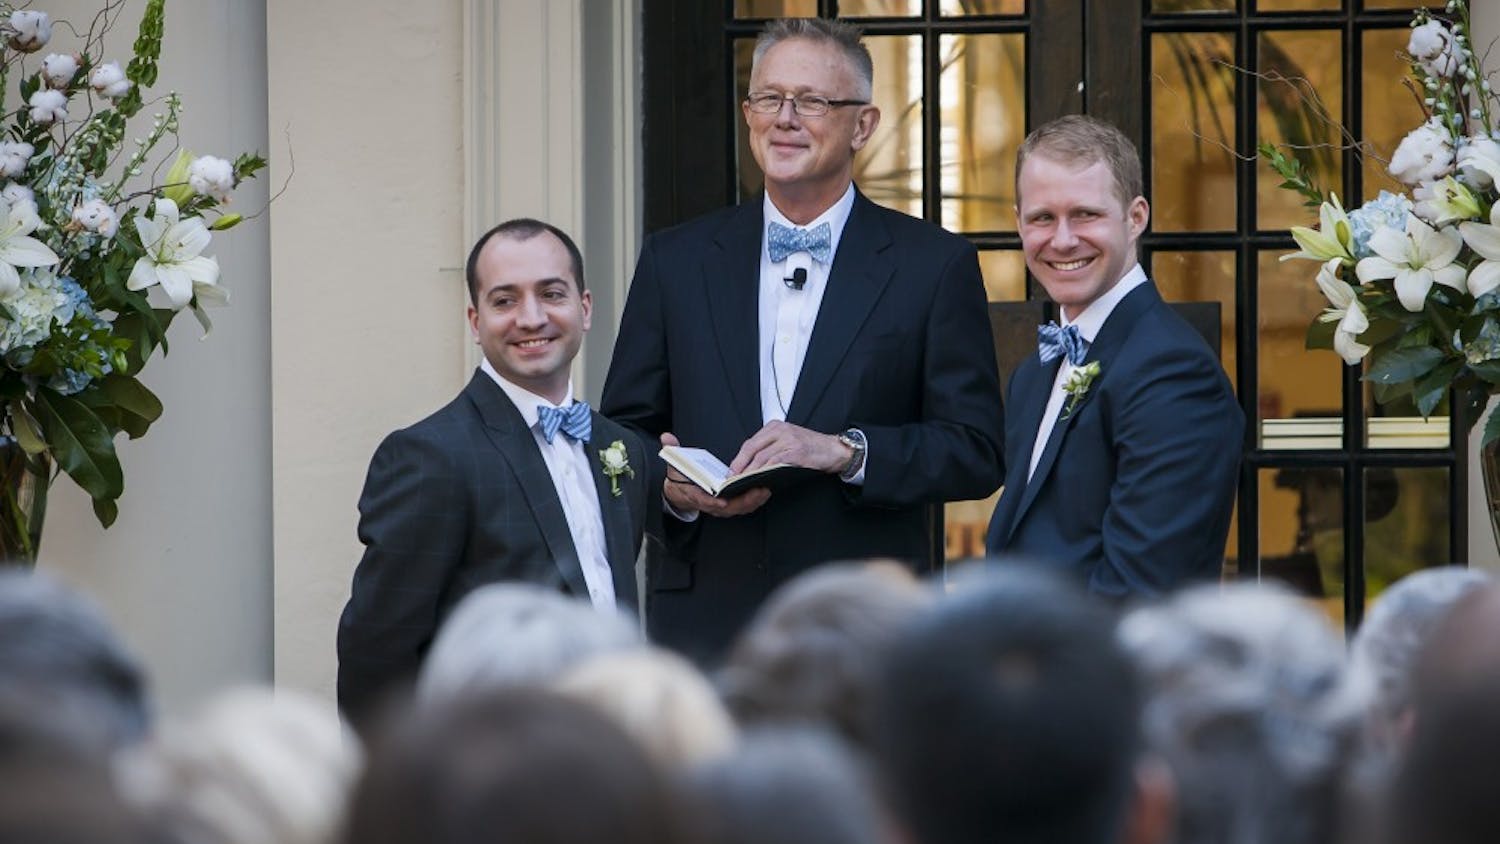 FROM LEFT: Zach Howell, officiant Dr. Jesse L. White Jr, and Garrett Hall (ALL CQ) during the first same-sex wedding ceremony ever at The Carolina Inn in Chapel Hill, NC.  on April 6, 2013.